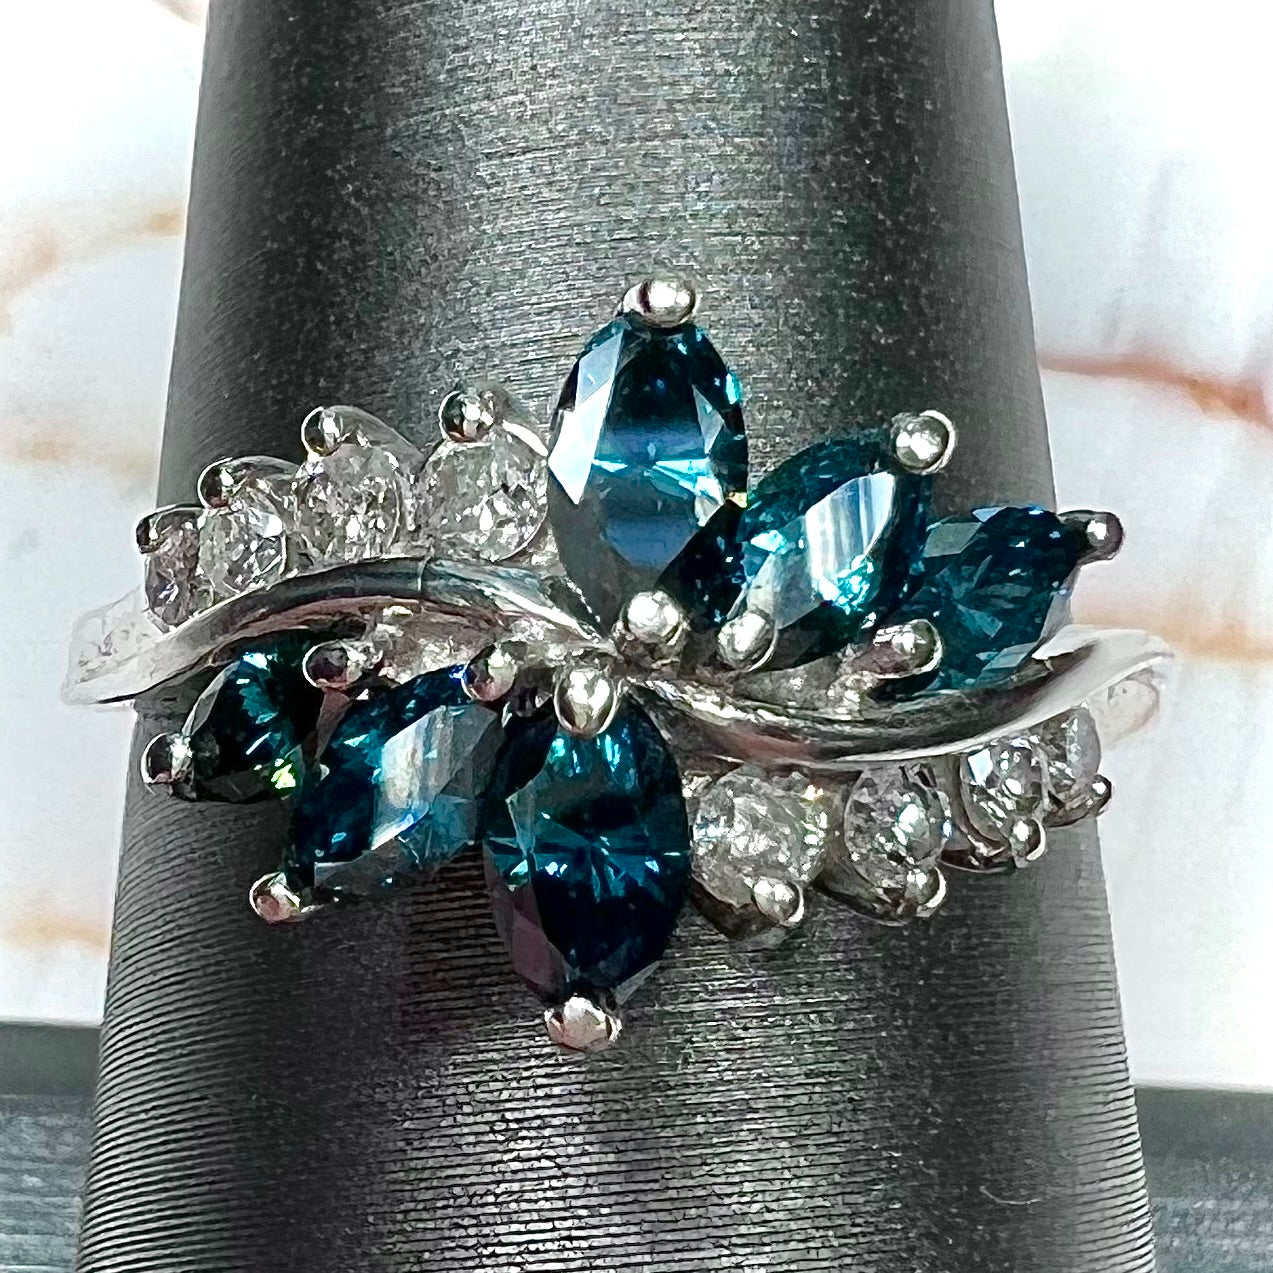 A white gold diamond cluster ring set with blue marquise cut and white round cut diamonds.